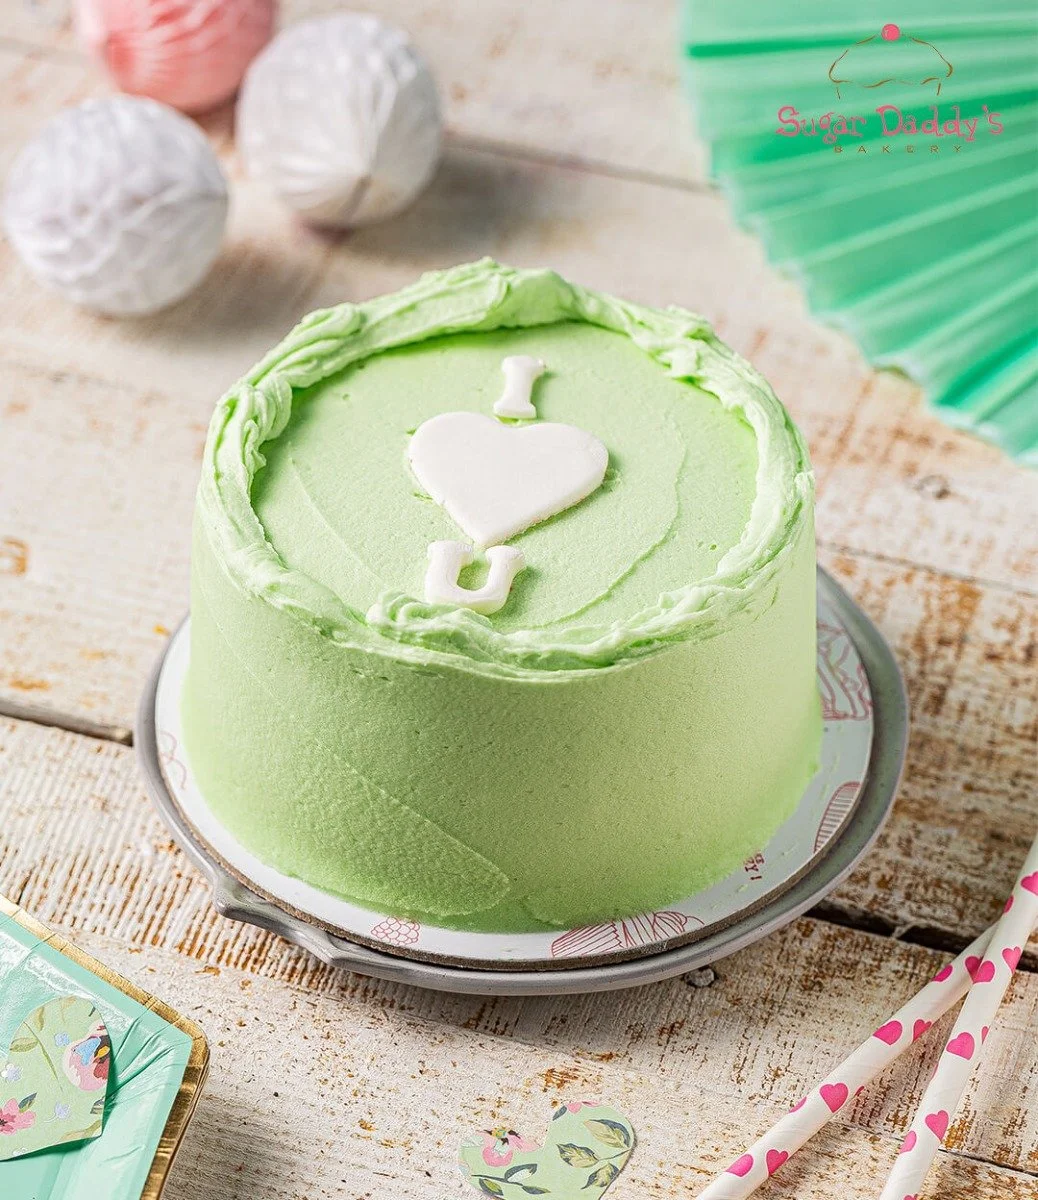 I Love You Green Lunch Box Cake By Sugar Daddy'S Bakery 